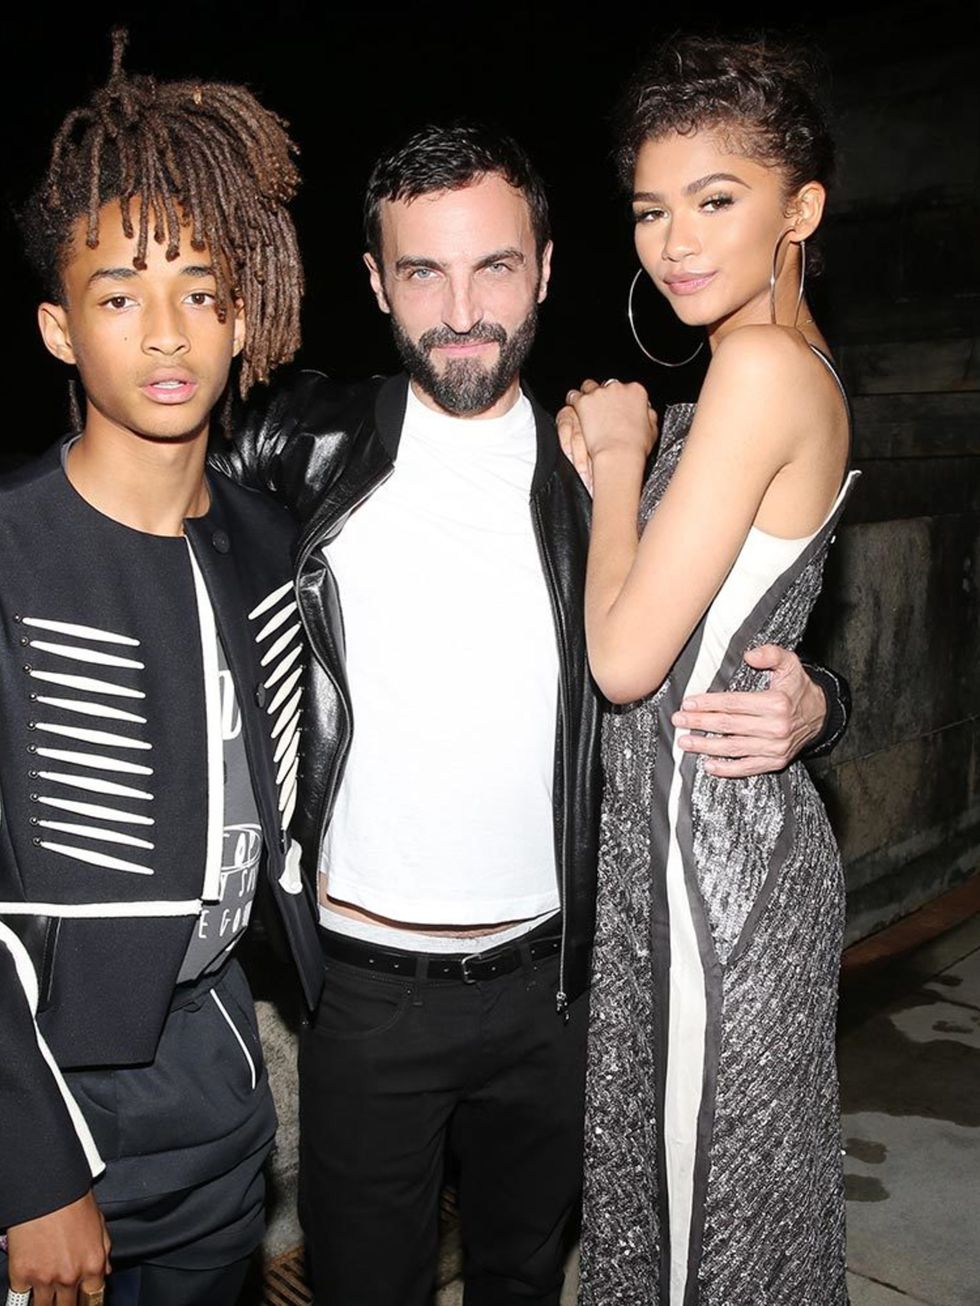 Jaden Smith, Nicholas Ghesquiere and Zendaya at the Louis Vuitton Cruise party in Rio, May 2016.